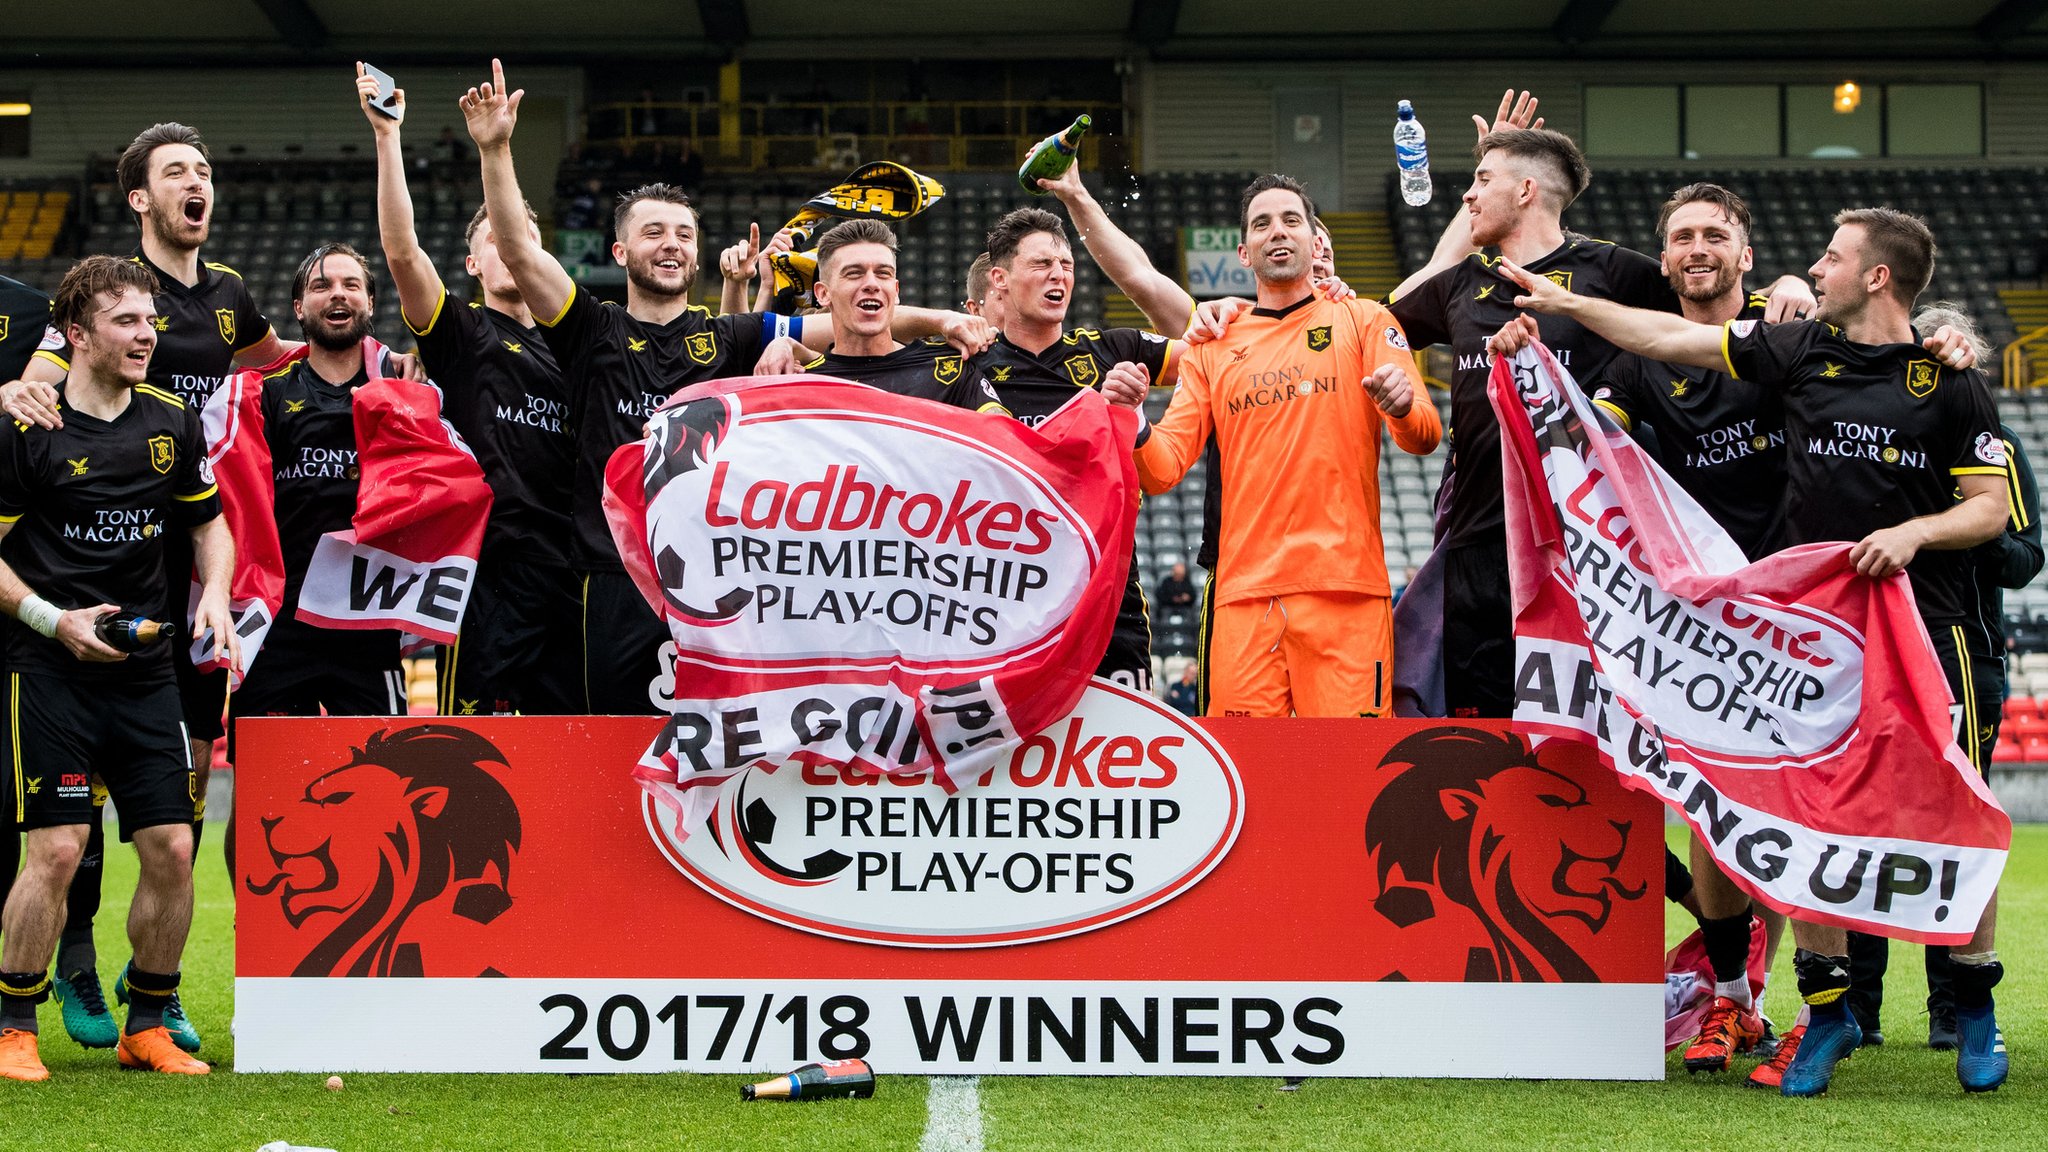 Livingston win promotion to Scottish Premiership in play-off final as Partick Thistle go down